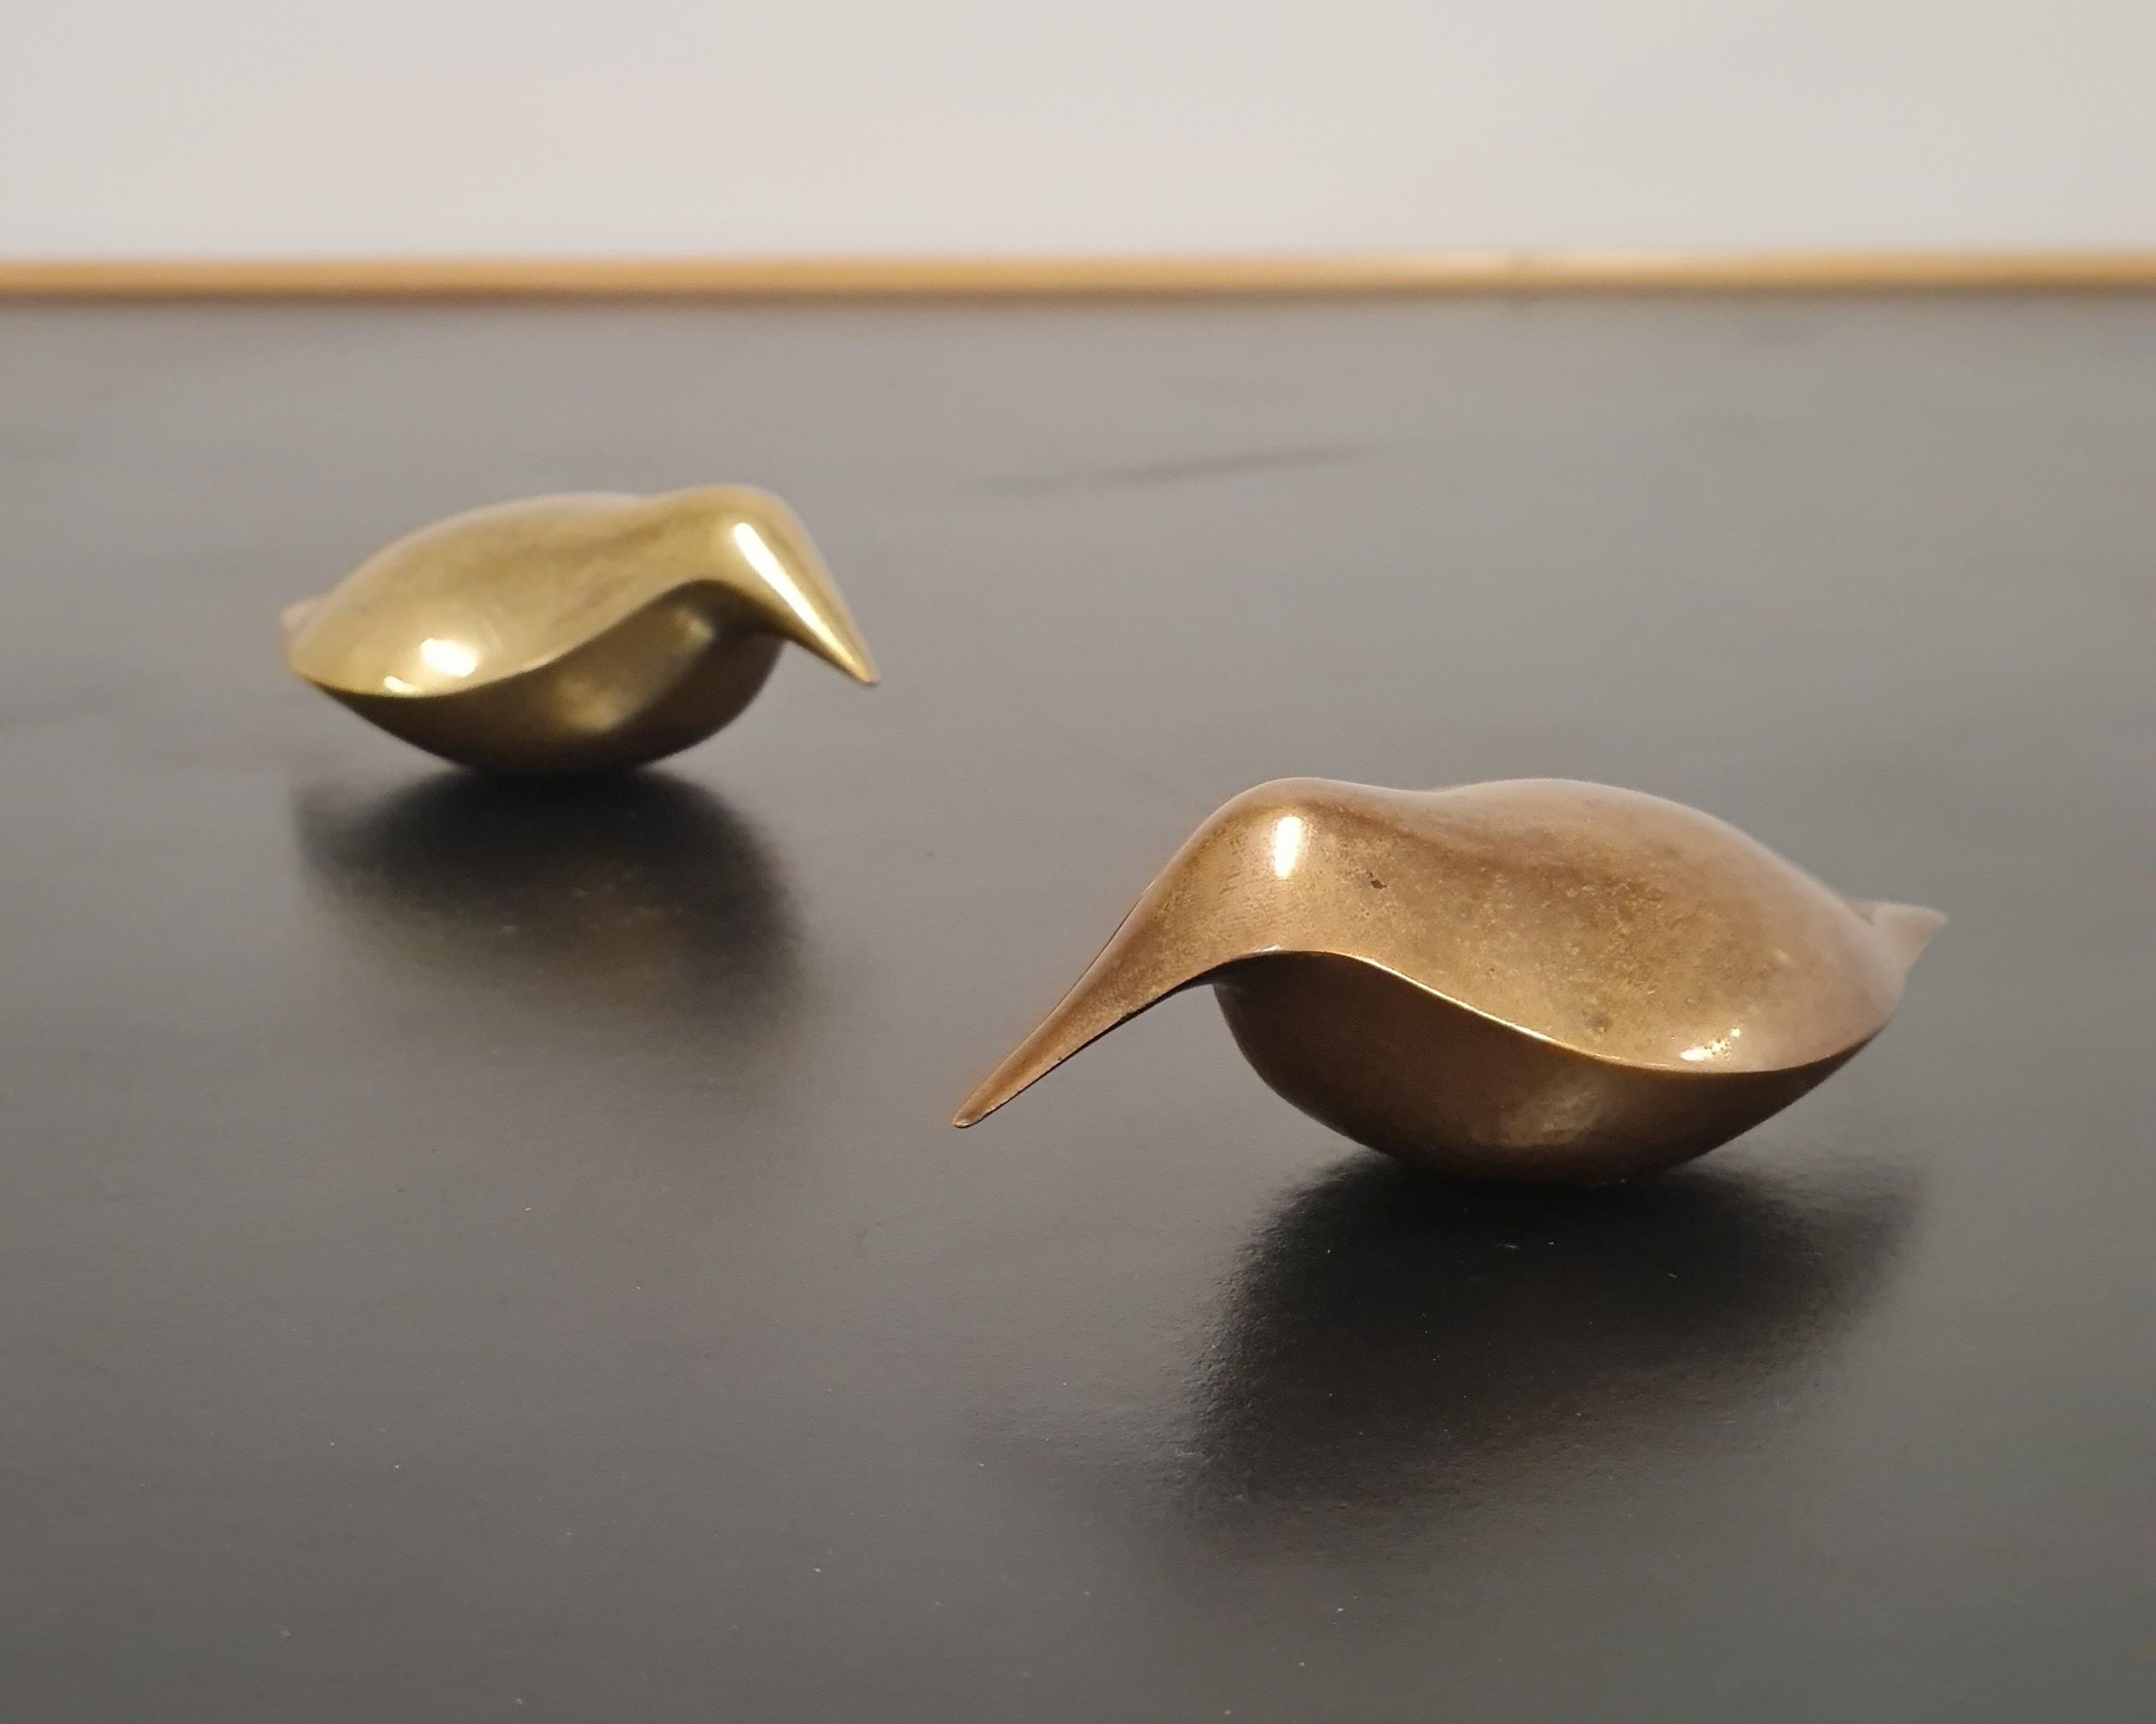 A couple of nice Tapio Wirkkala bronze bird paper weights.  Both items are in beautiful original condition with nice vintage patinas.  Although originally intended as paper weights, these items can be considered as art objects on their own,